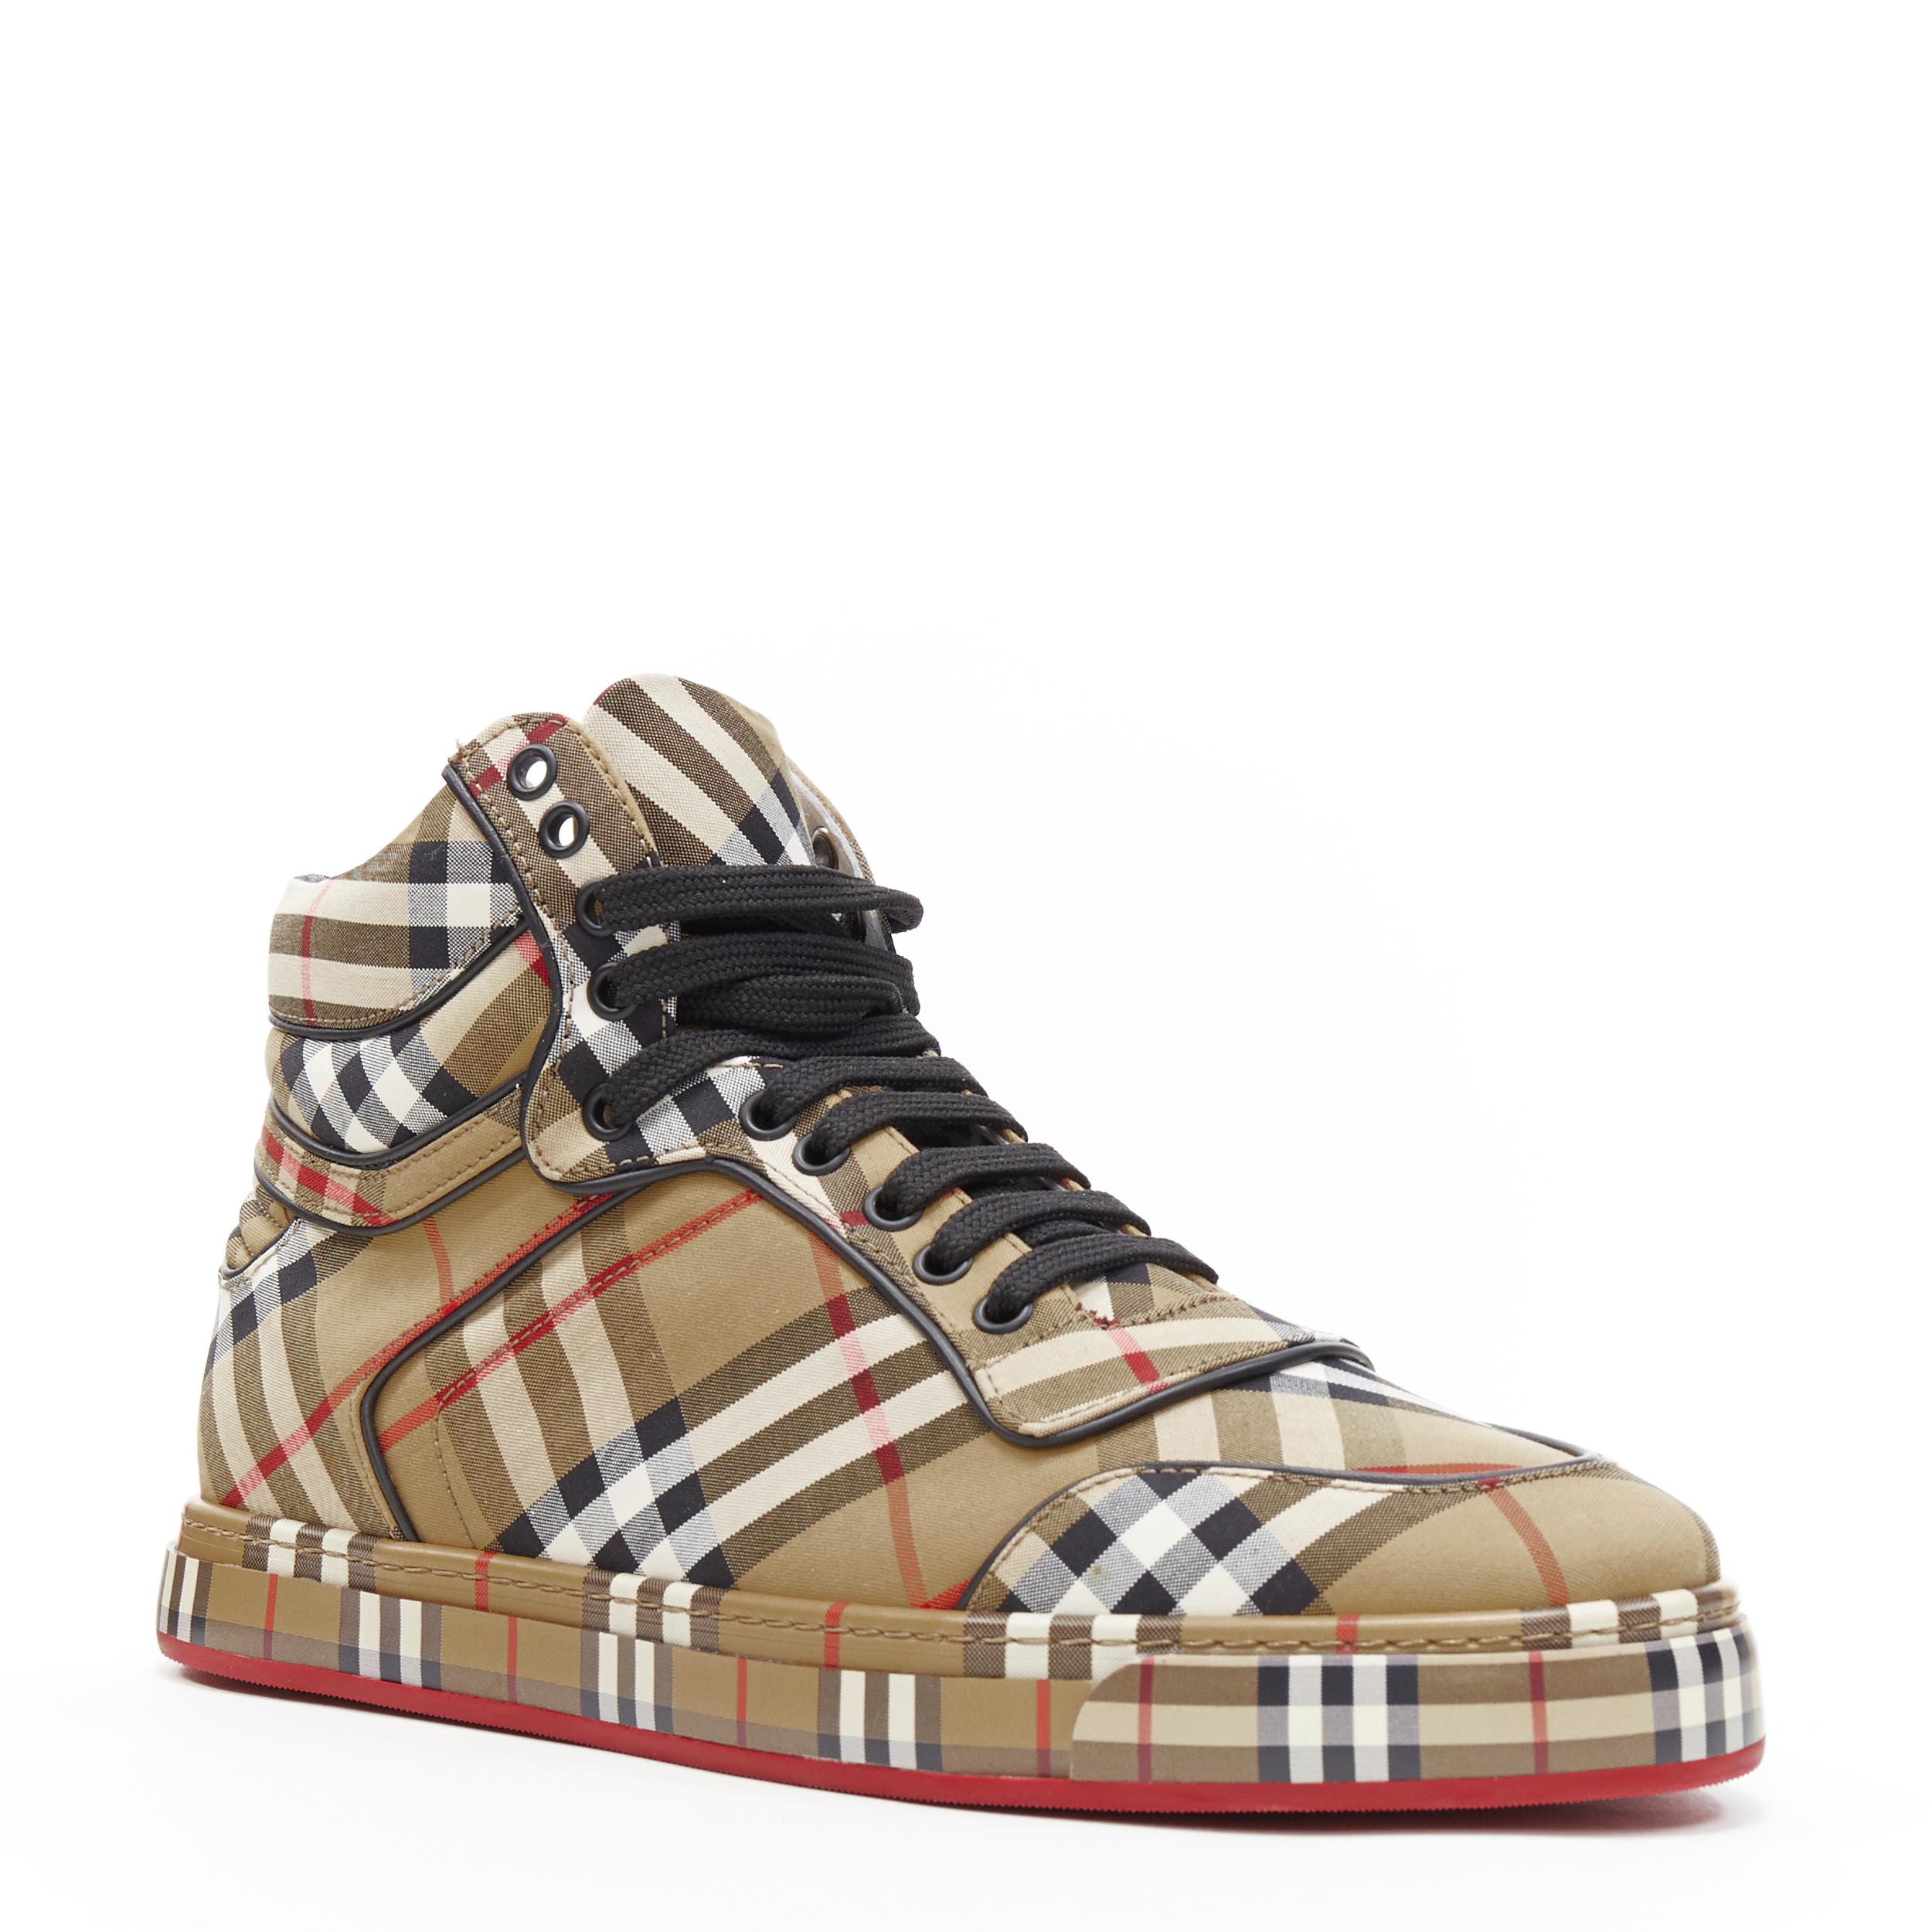 new BURBERRY TISCI Redford Antique Yellow House Check high top sneakers EU42
Brand: Burberry
Designer: Riccardo Tisci
Collection: 2019
Model Name / Style: Redford
Material: Cotton
Color: Brown
Pattern: Check
Closure: Lace up
Lining material: